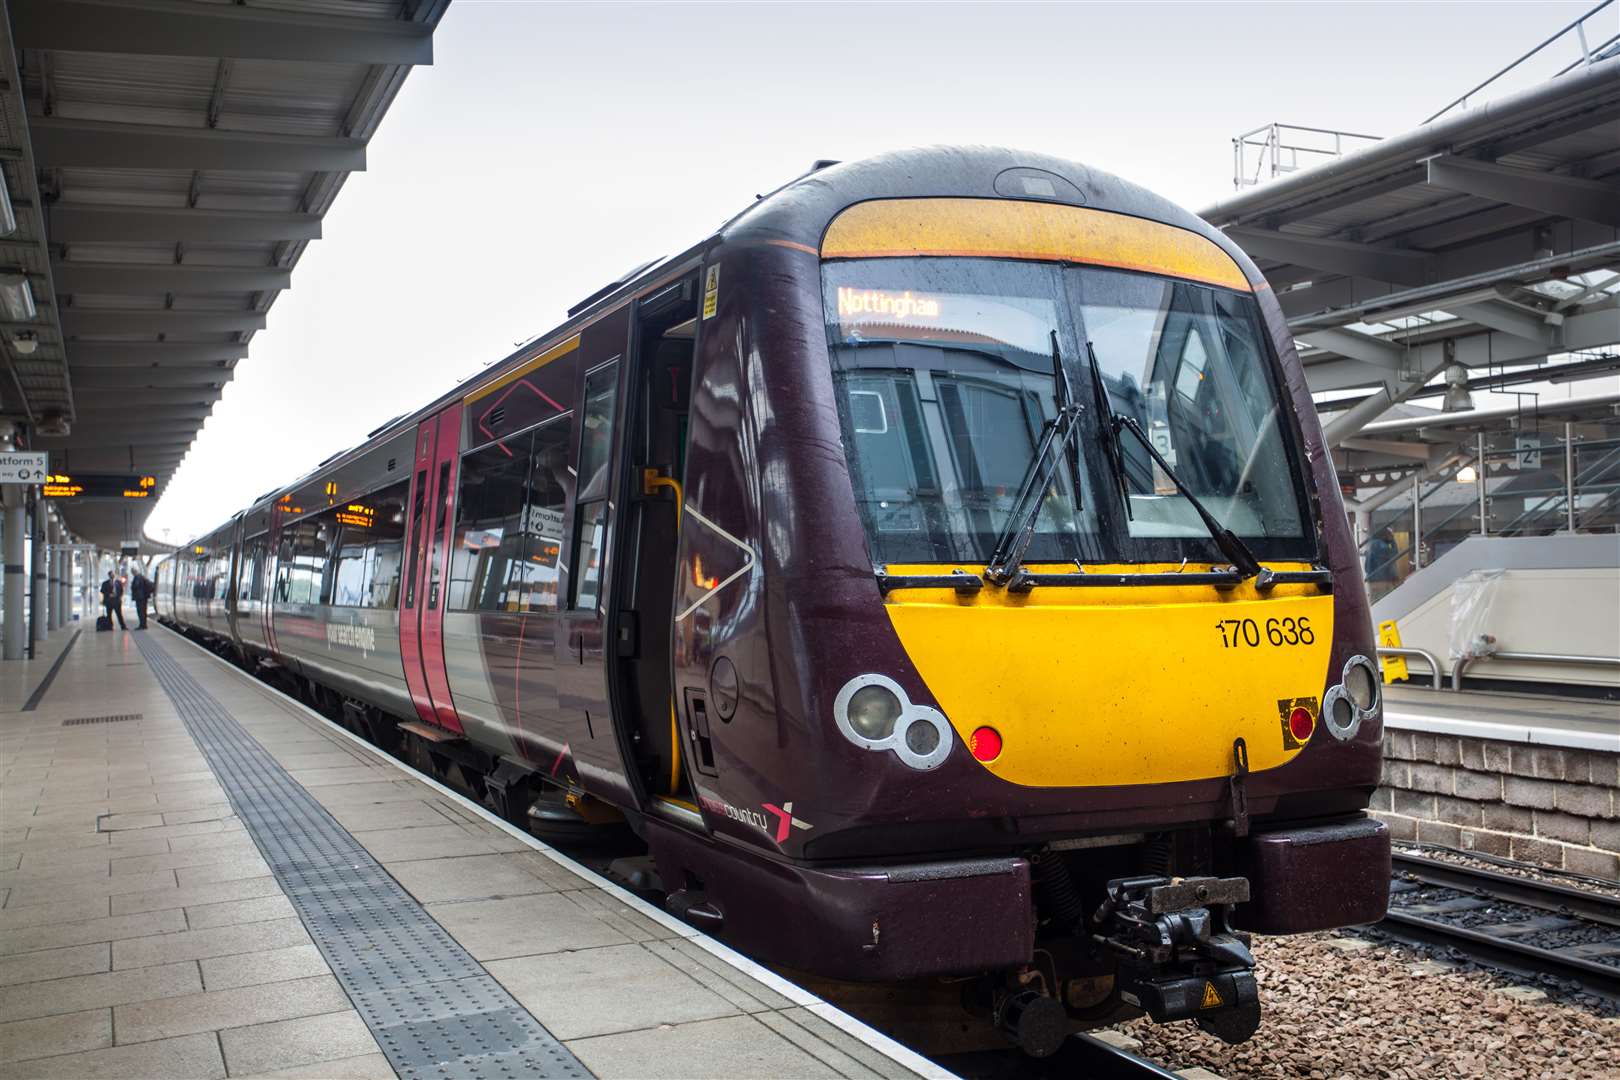 Derby is expected to be named as the new headquarters of Britain’s railways, it has been reported (MediaWorldImages/Alamy Stock Photo/PA)